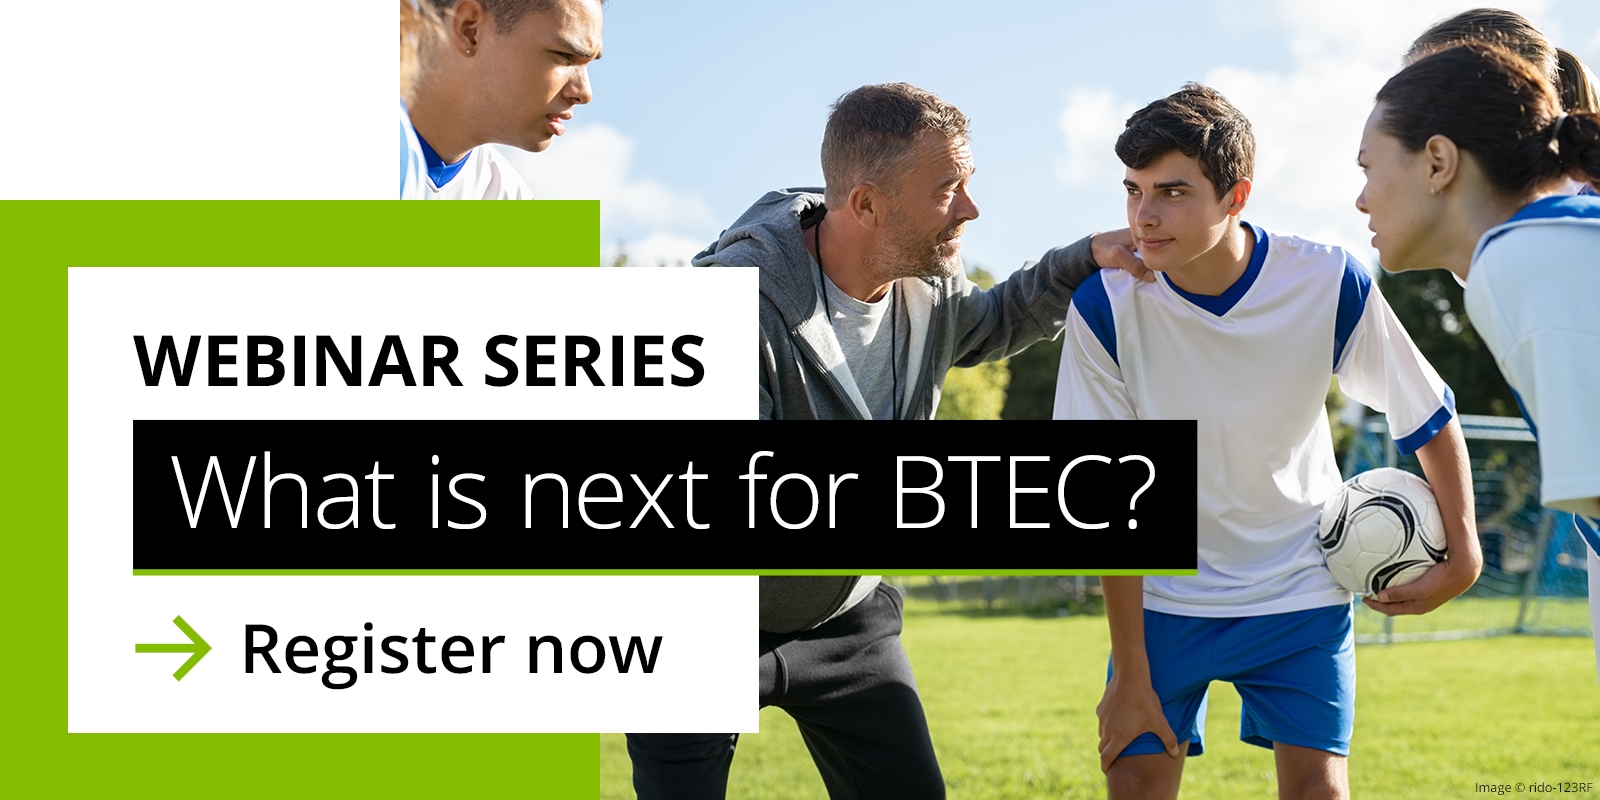 Webinar series - what is next for BTEC